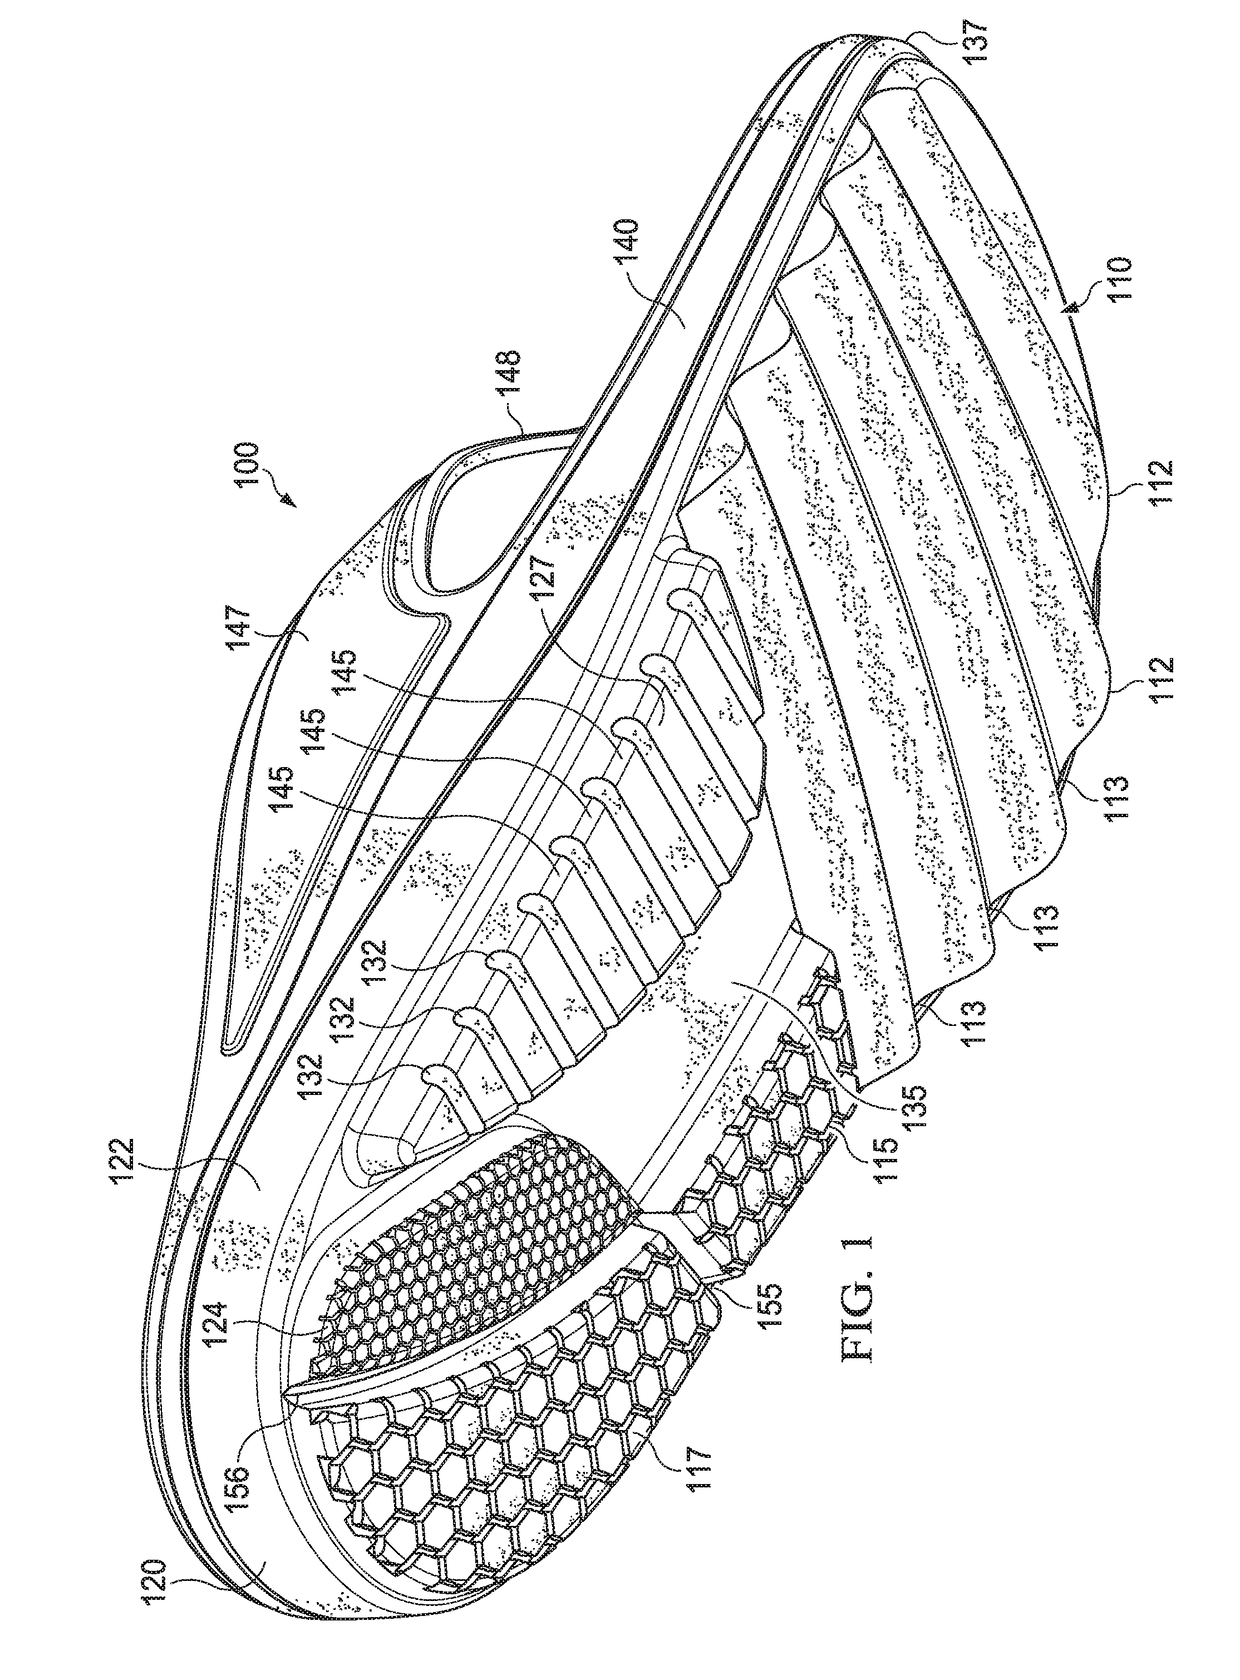 Sandal with Cushioning and Contoured Support